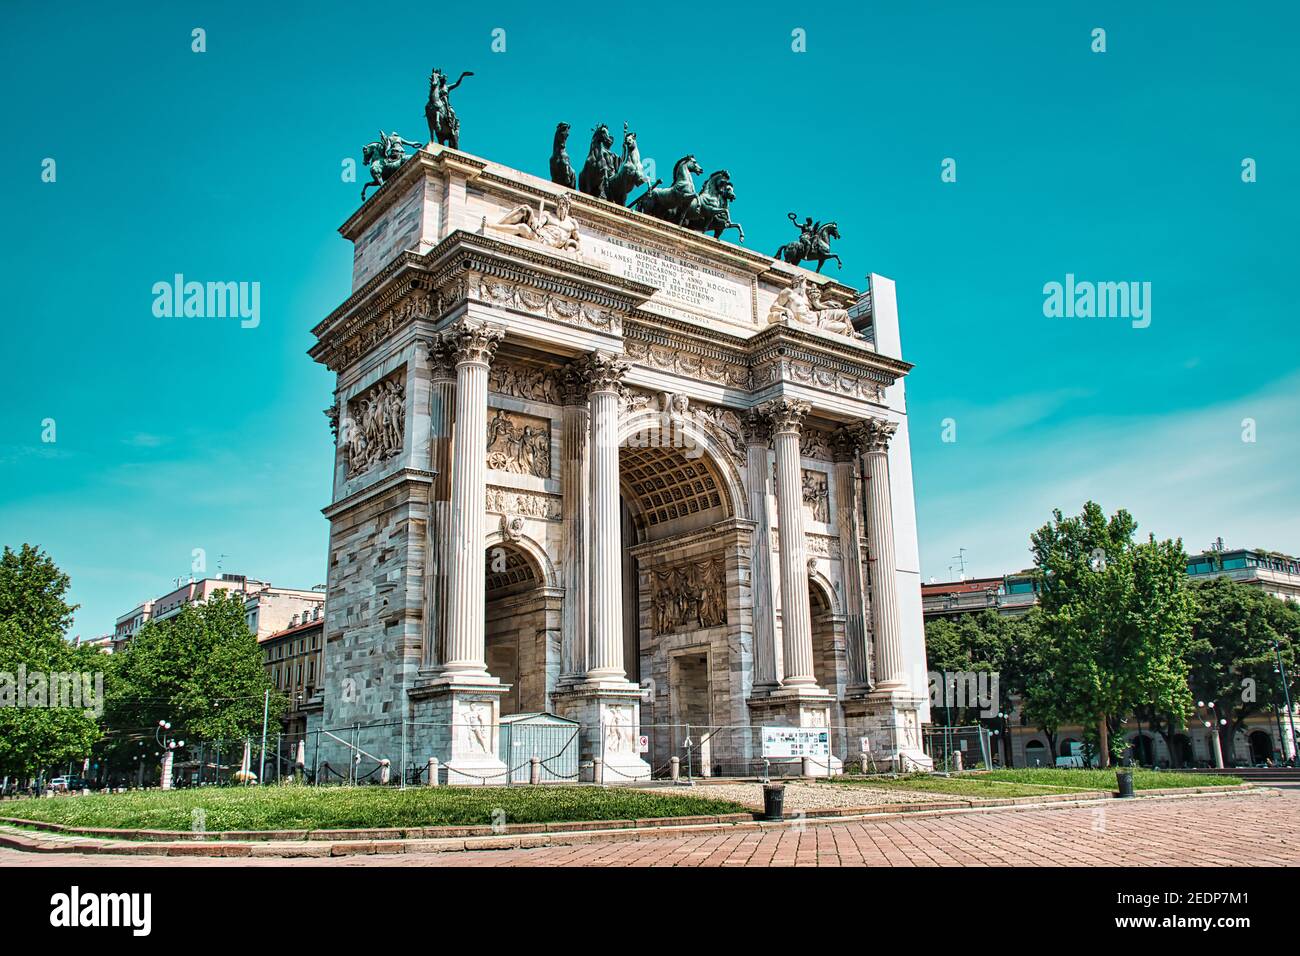 Milan, Italy, 08.29.2020 Porta Sempione is a city gate of Milan. The gate is marked by a landmark triumphal arch called Arco della Pace , Arch of Peac Stock Photo